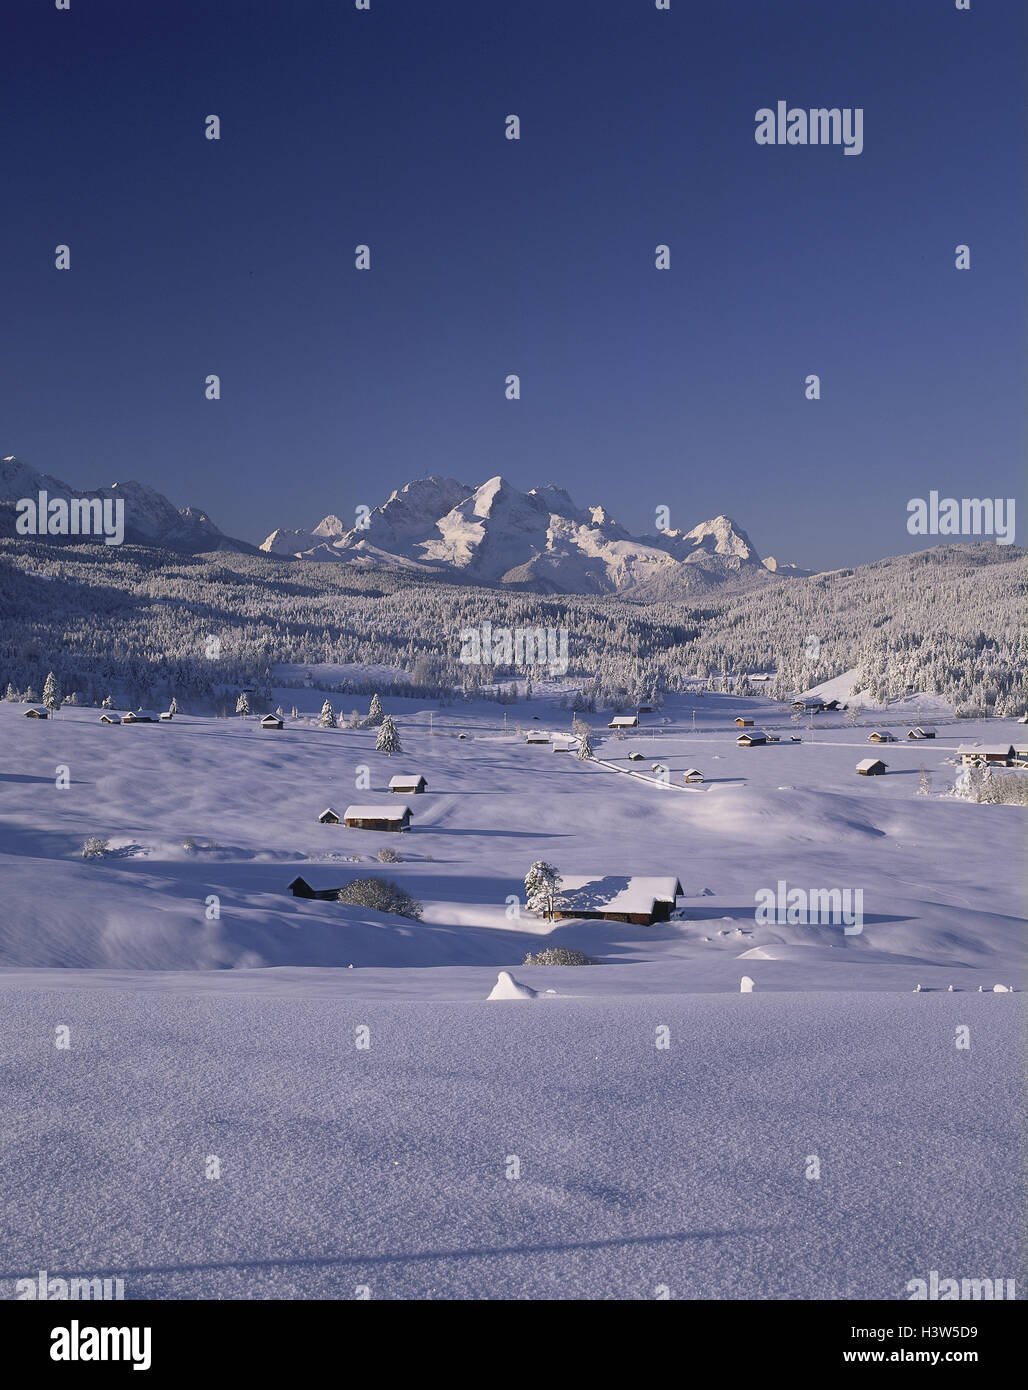 Germany, Obb., Werdenfels, Wetterstein Range snow-covered scenery, mountains, snow-covered, Stadl, winter, Stock Photo